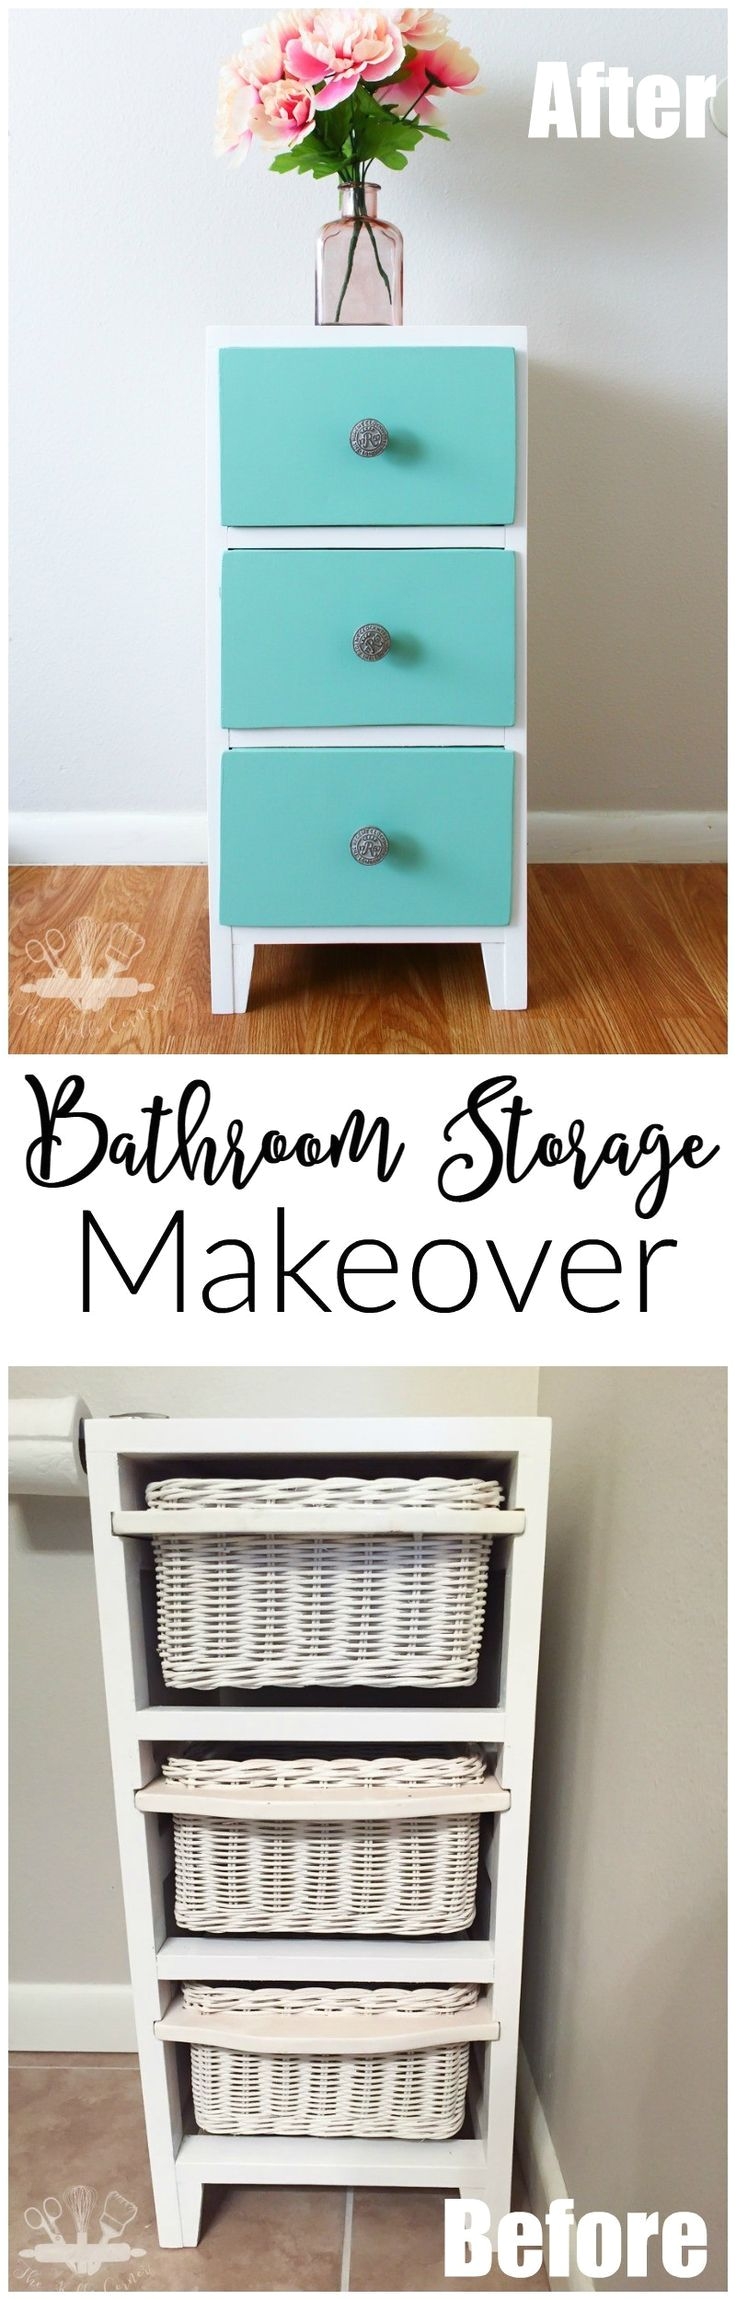 bathroom storage solution thrift store upcycle challenge bathroom storage solutions bathroom storage and flea market finds